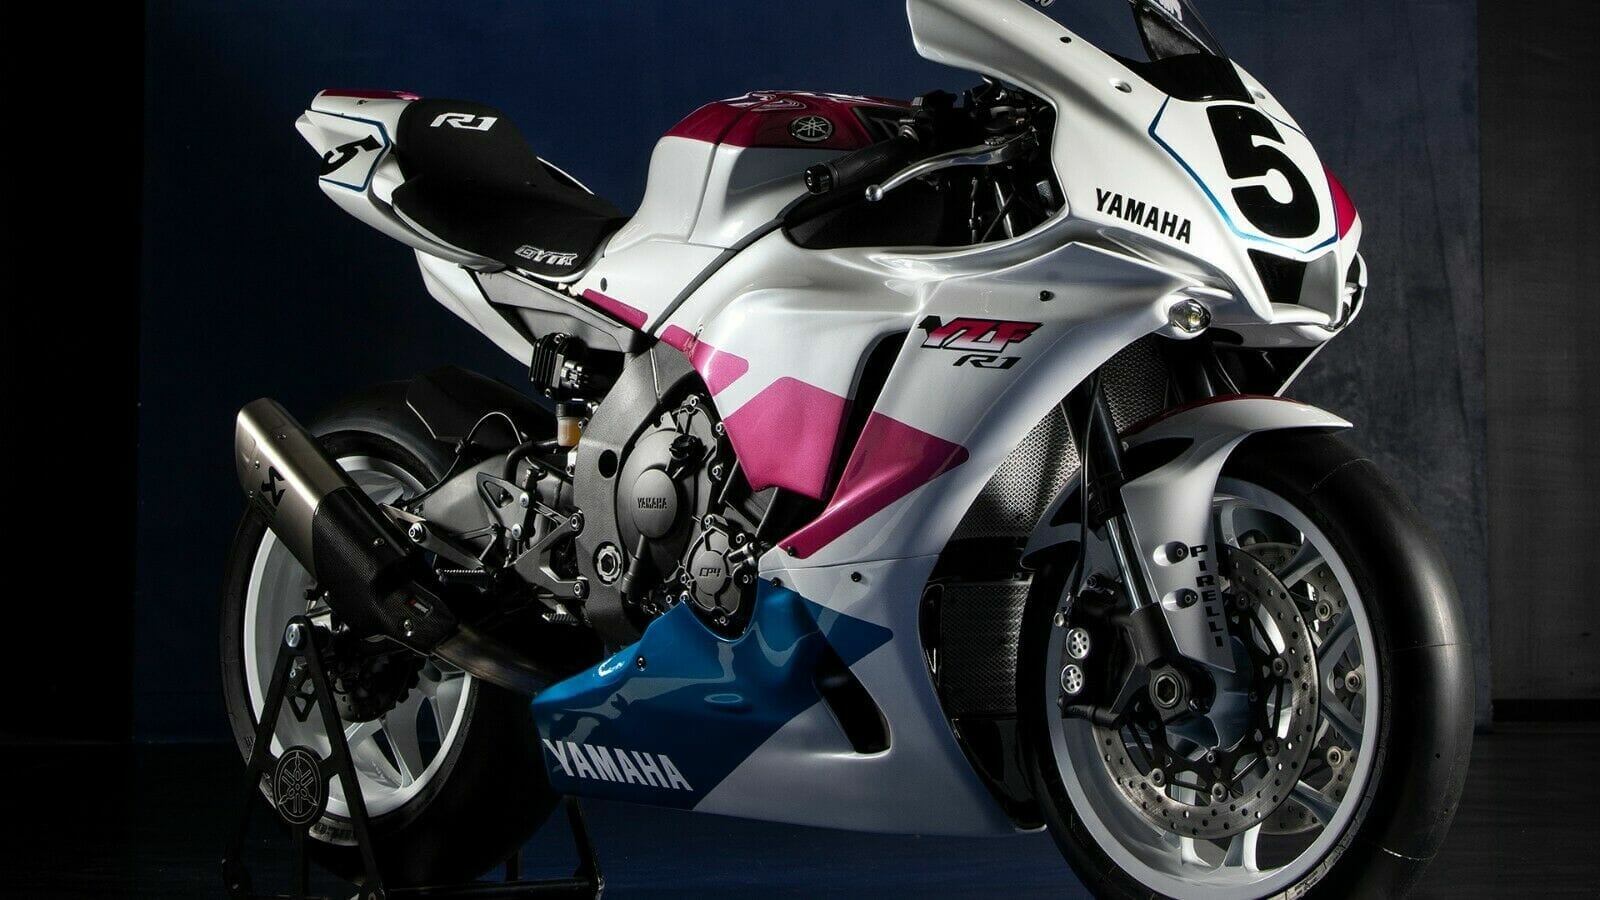 Yamaha R1 Piro-Replica auctioned for a good cause
- also in the App MOTORCYCLE NEWS